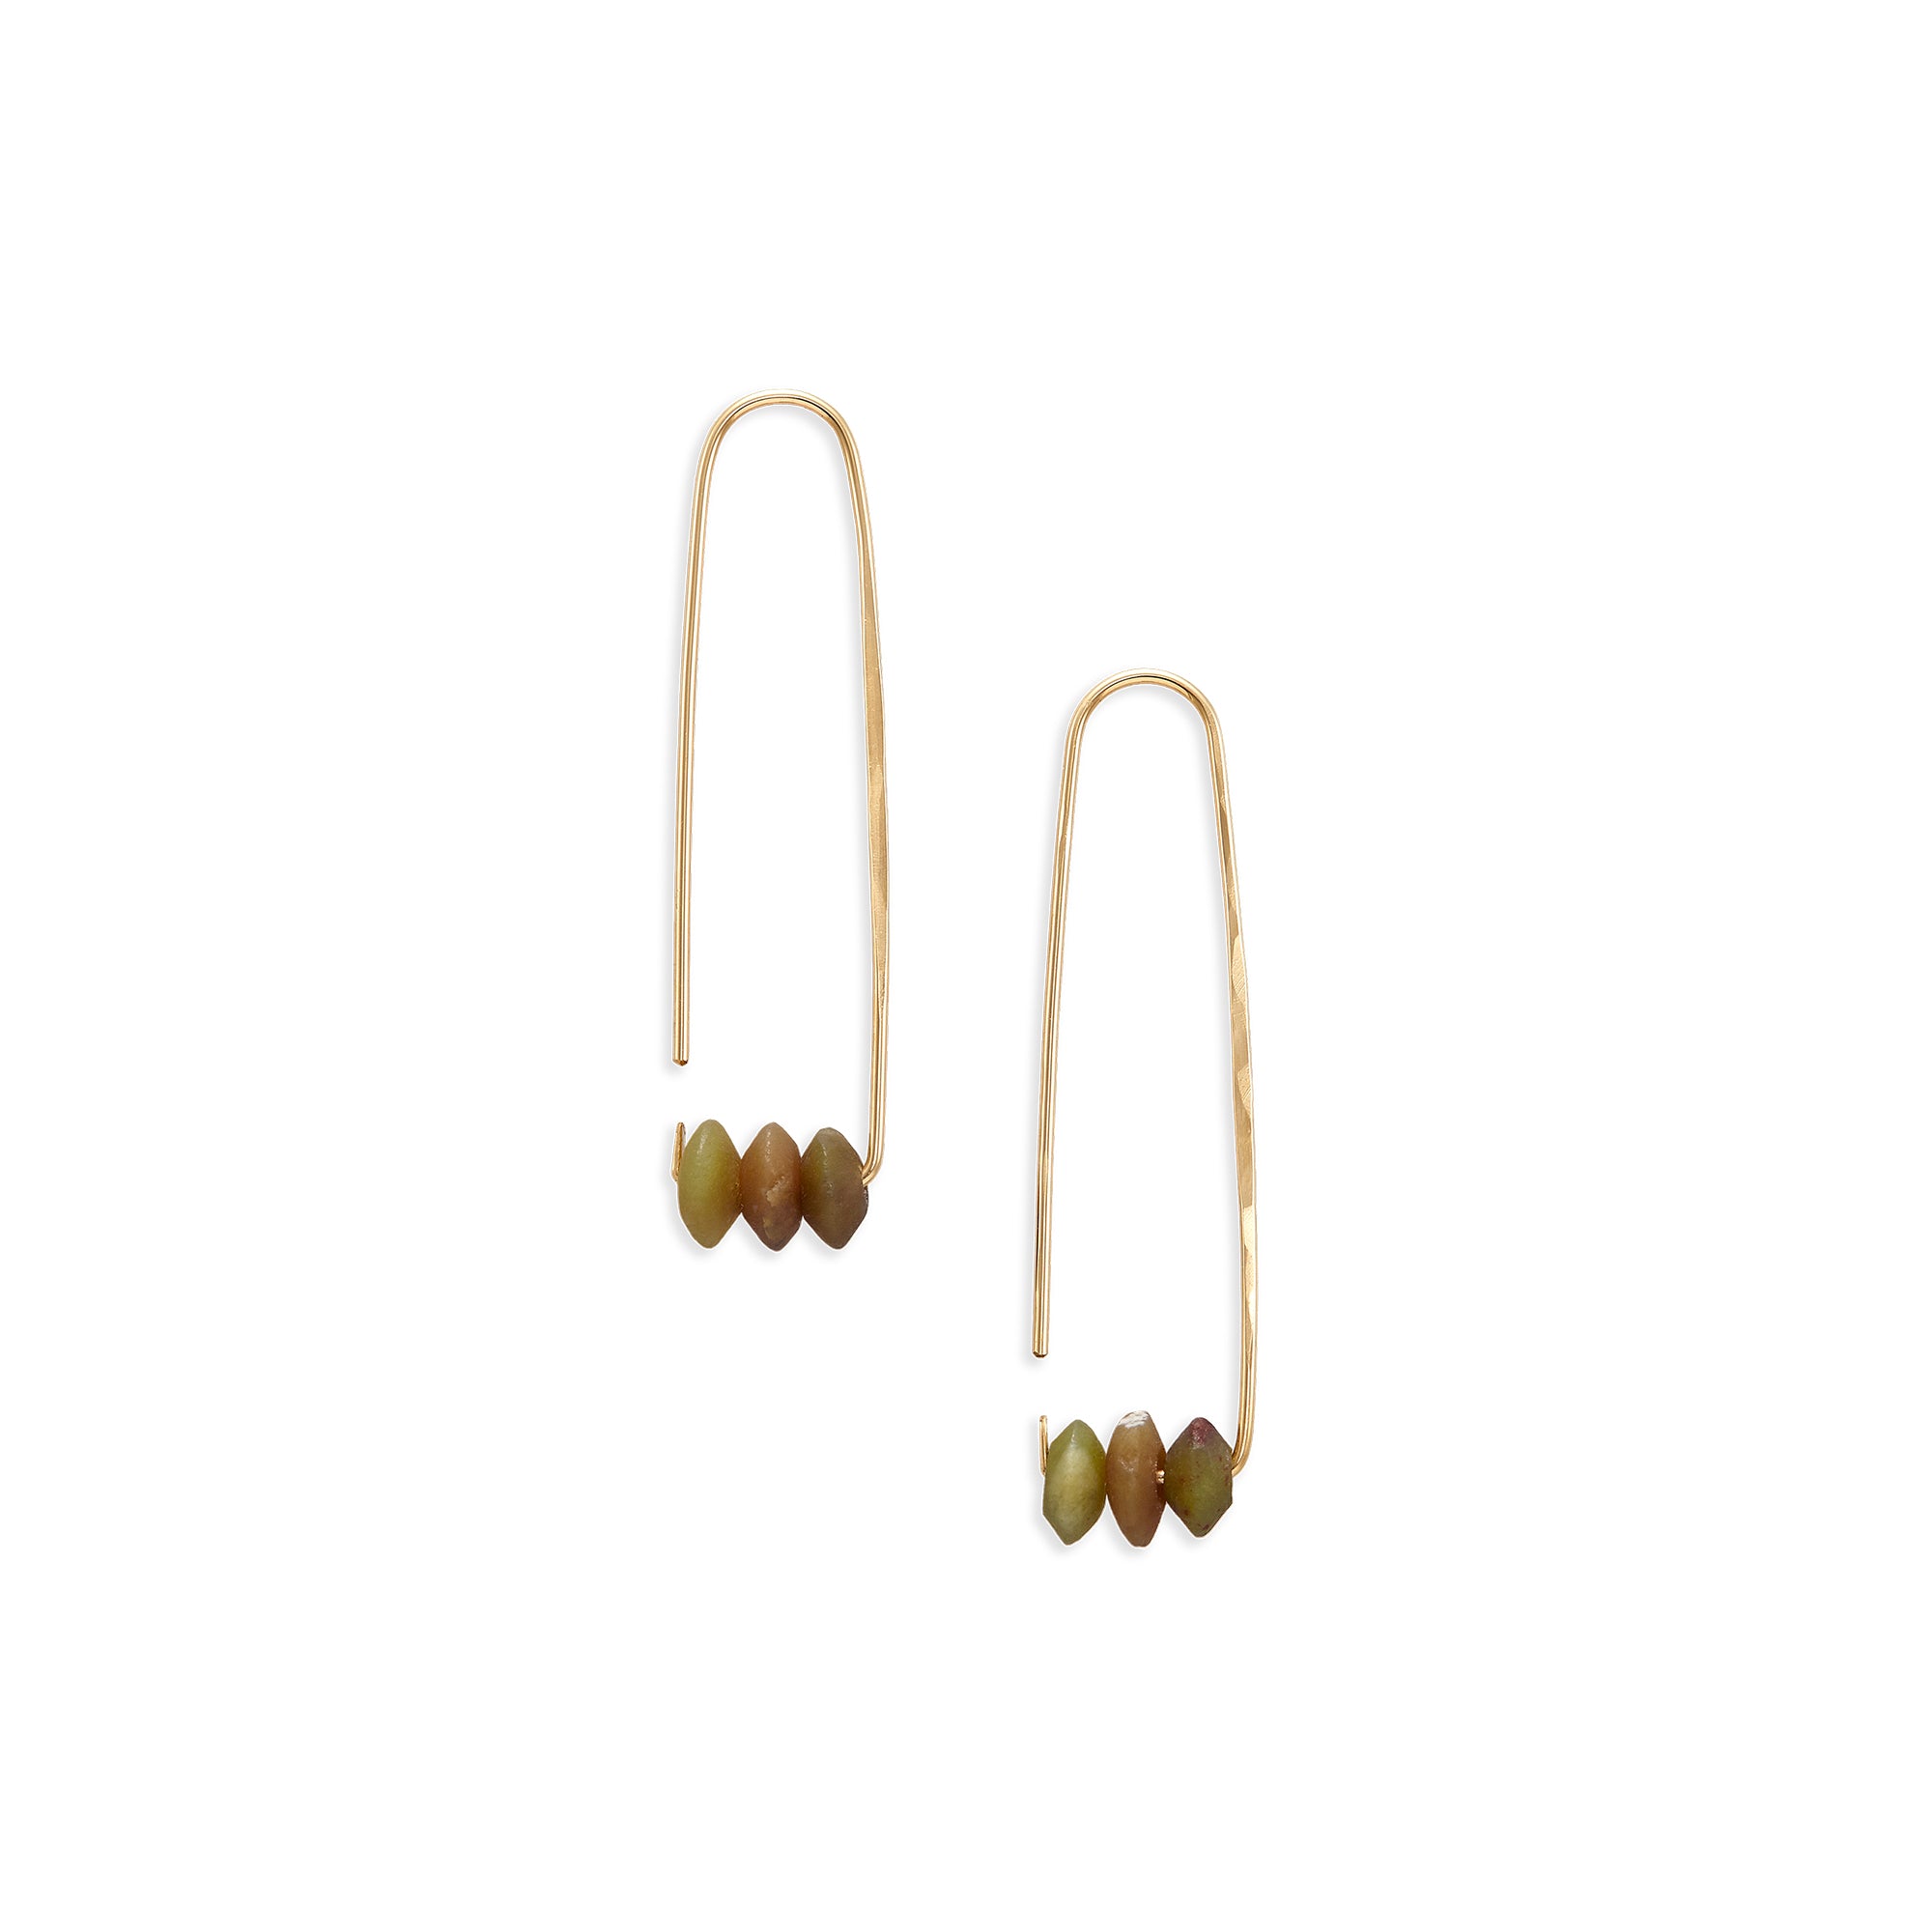 The Elongated Aura Hoops are made of 14k yellow gold fill or sterling silver and adorned with your choice of beads.